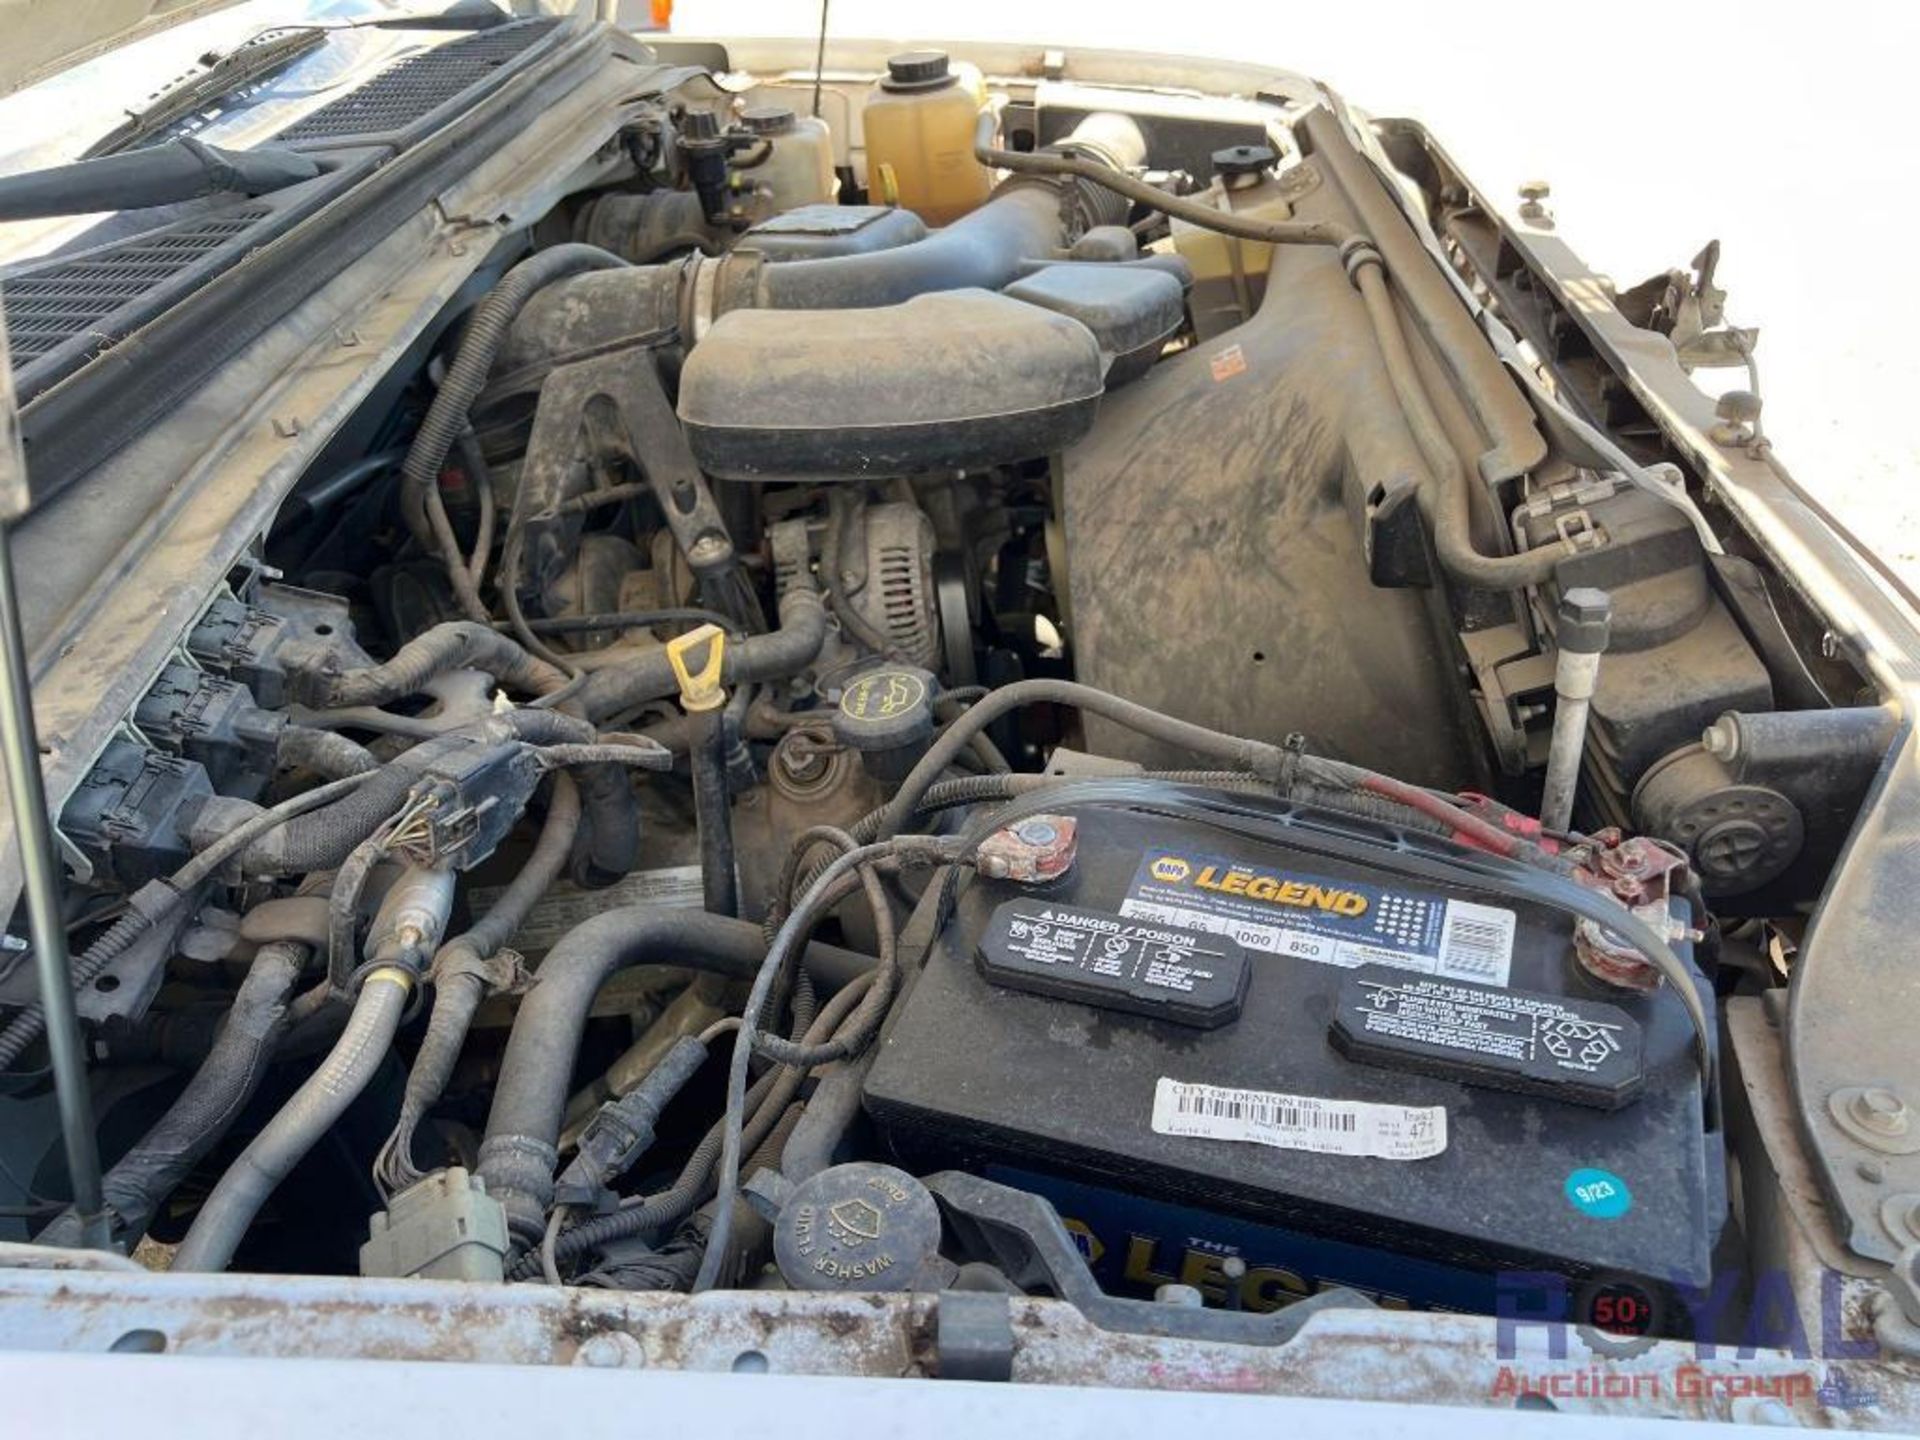 2008 Ford F250 Service Truck - Image 10 of 40